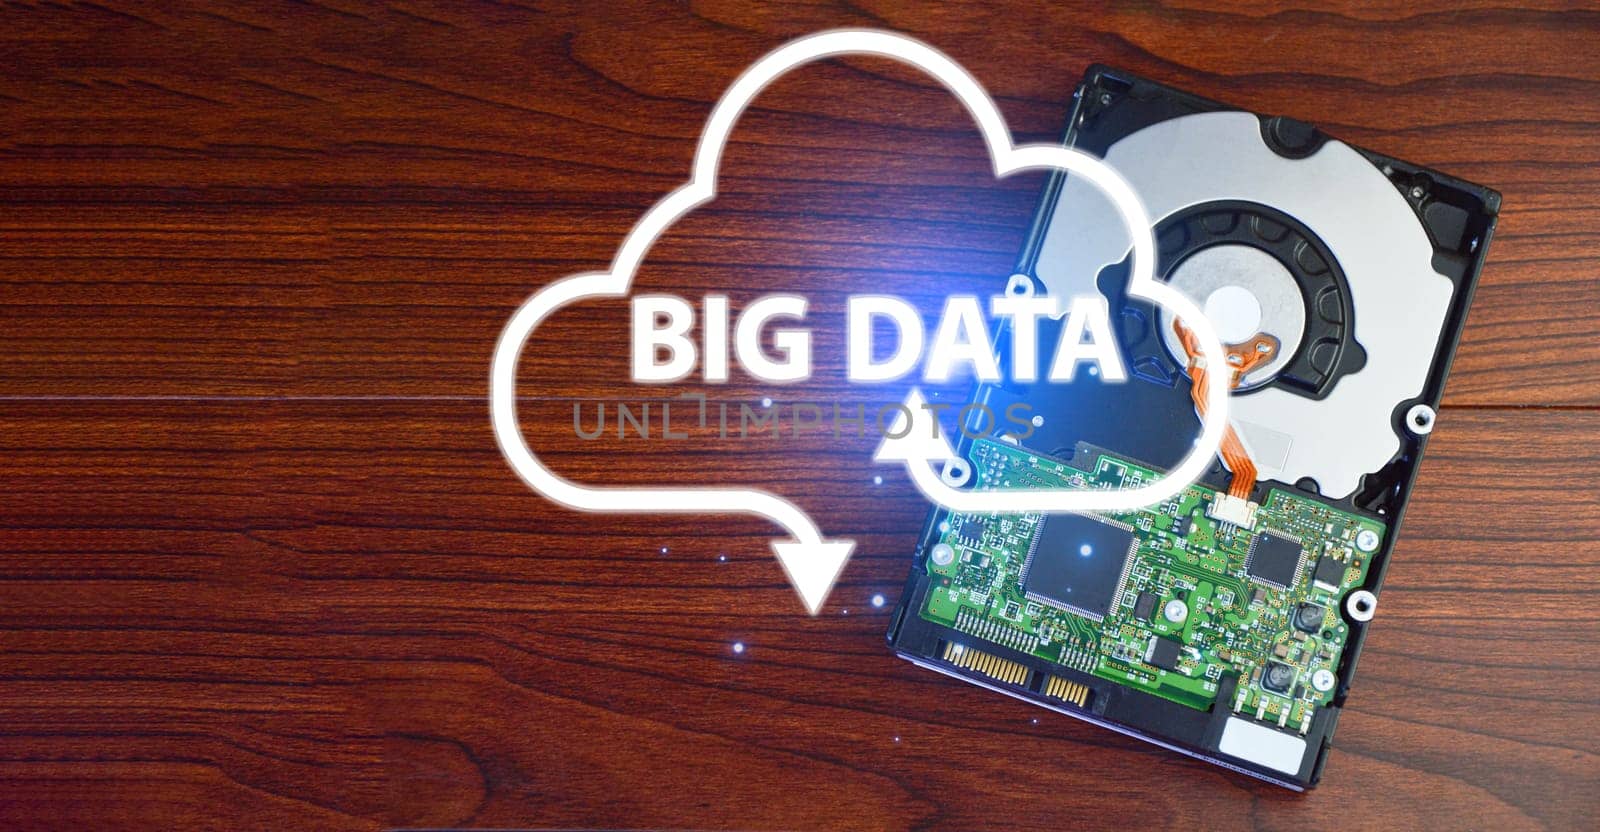 Big data storage and analytics in the cloud or on external server